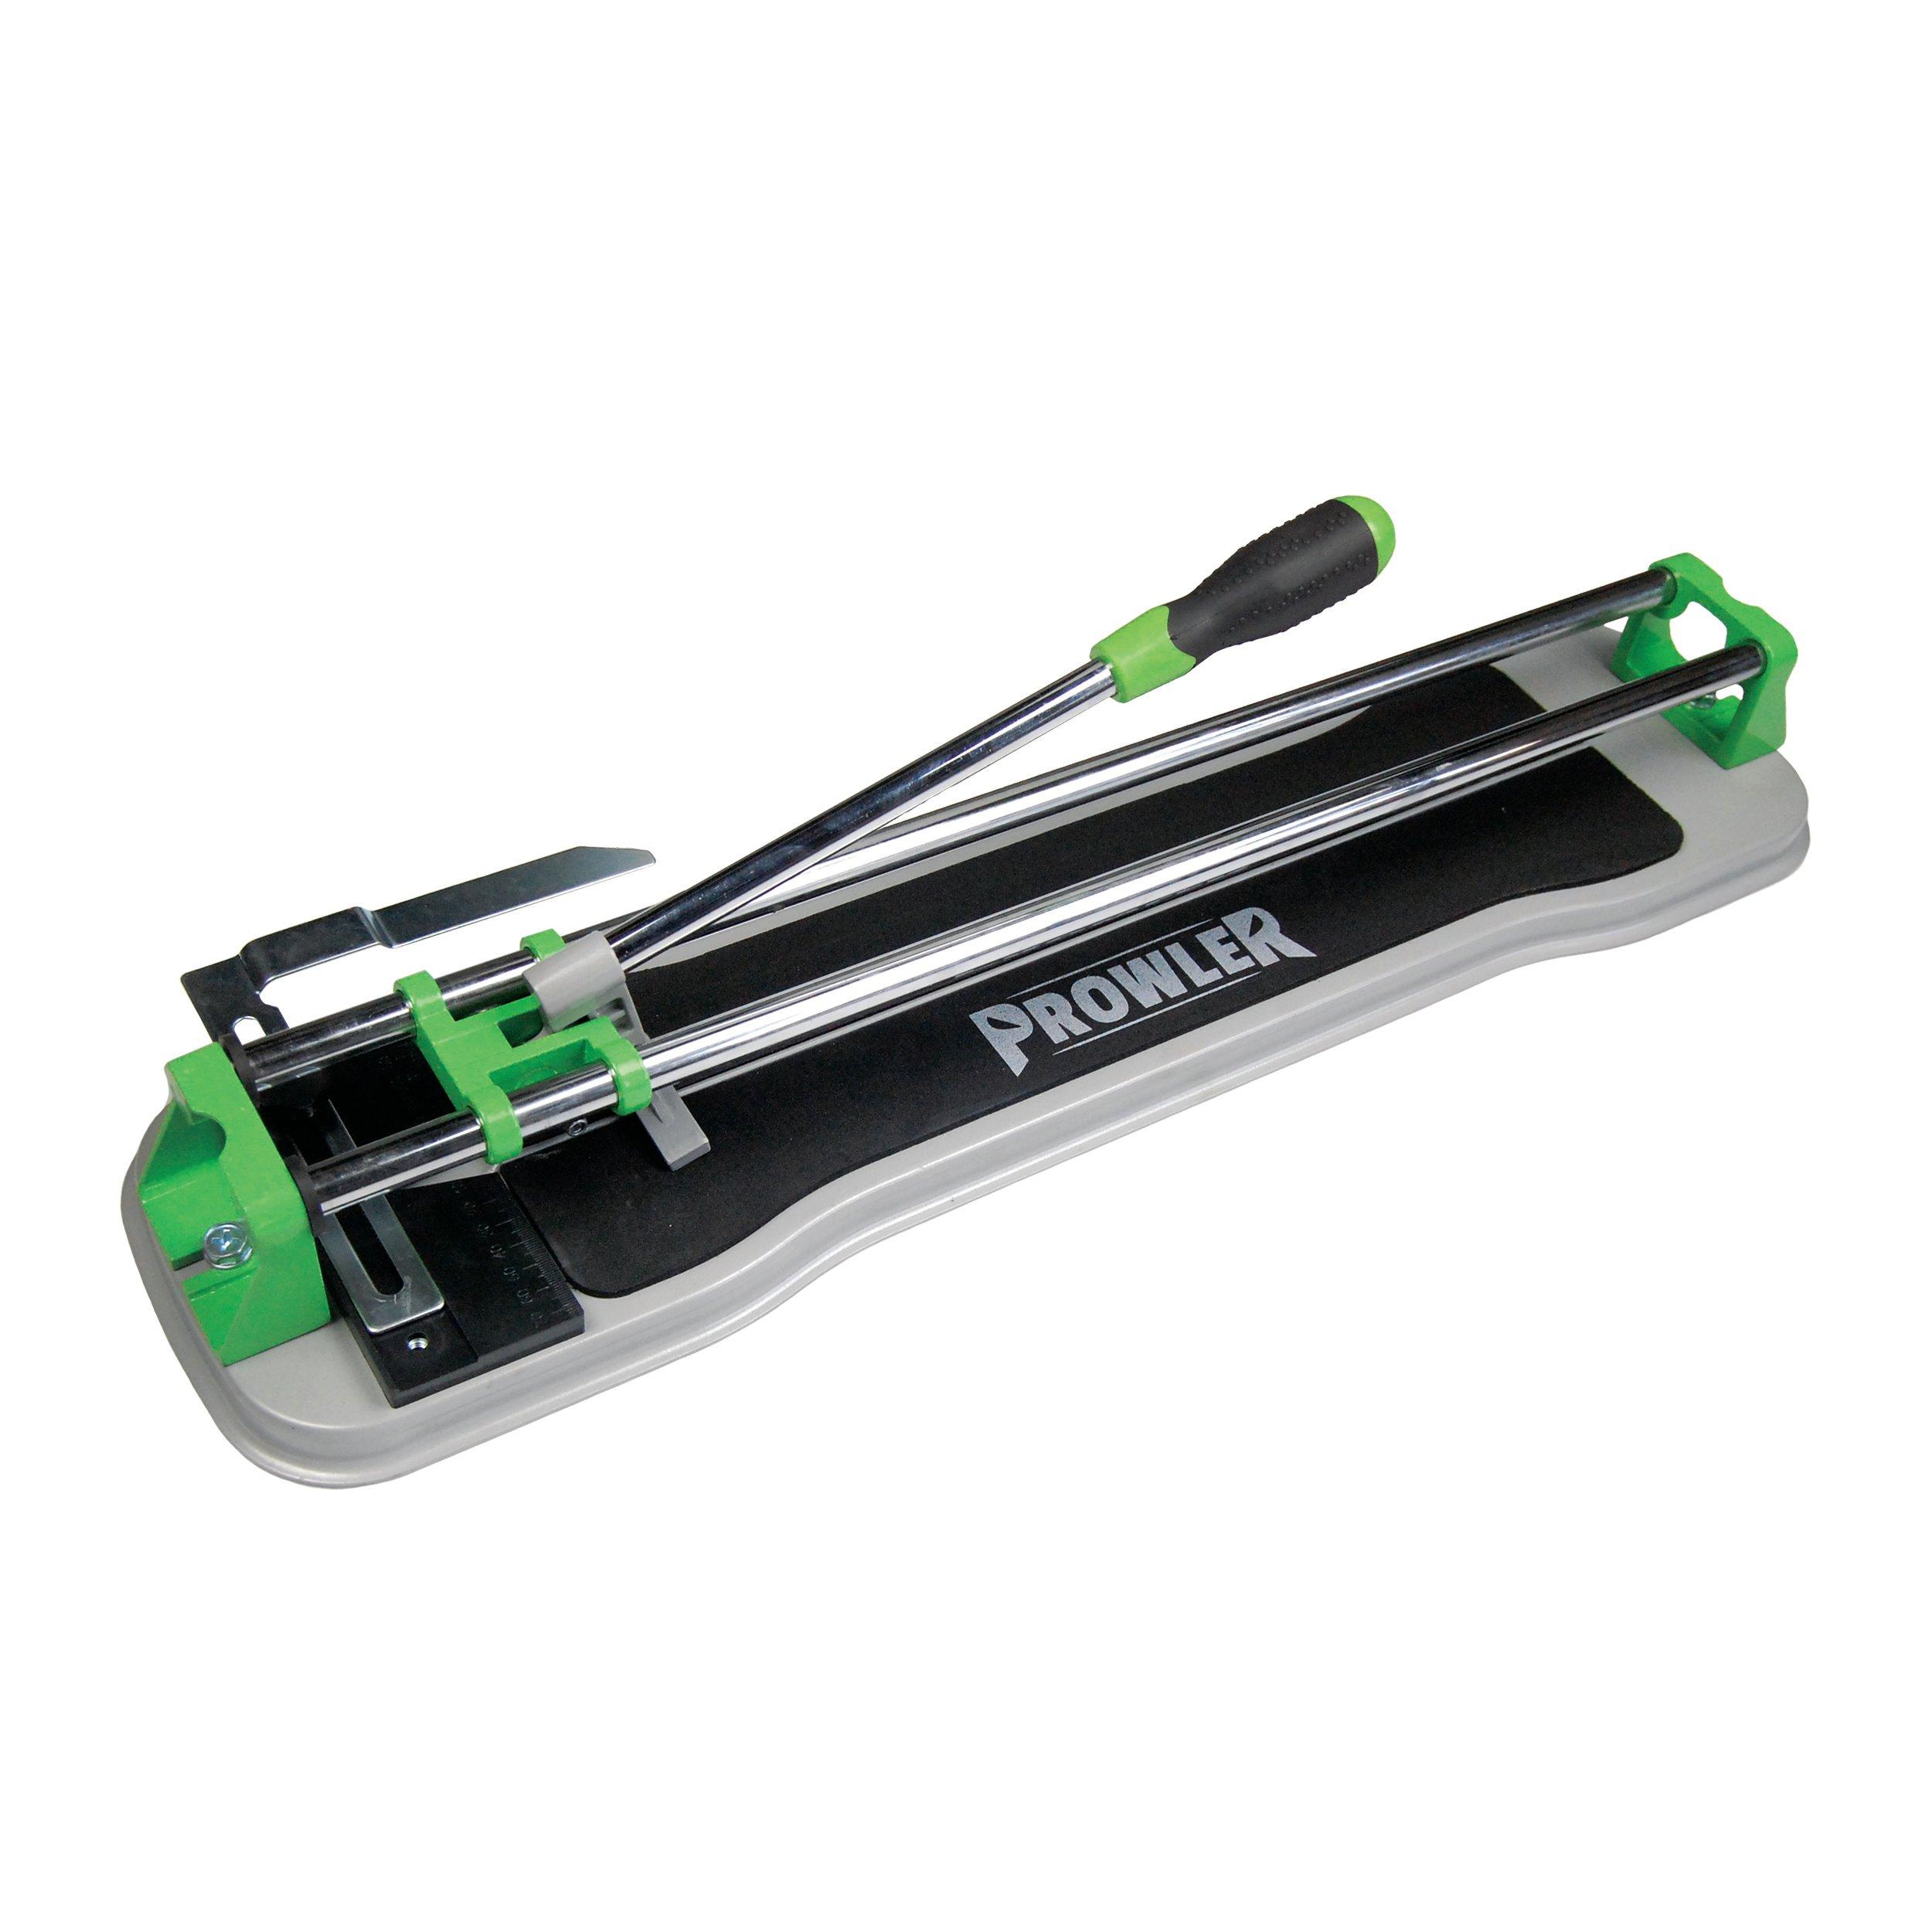 Prowler 20in. Manual Tile Cutter